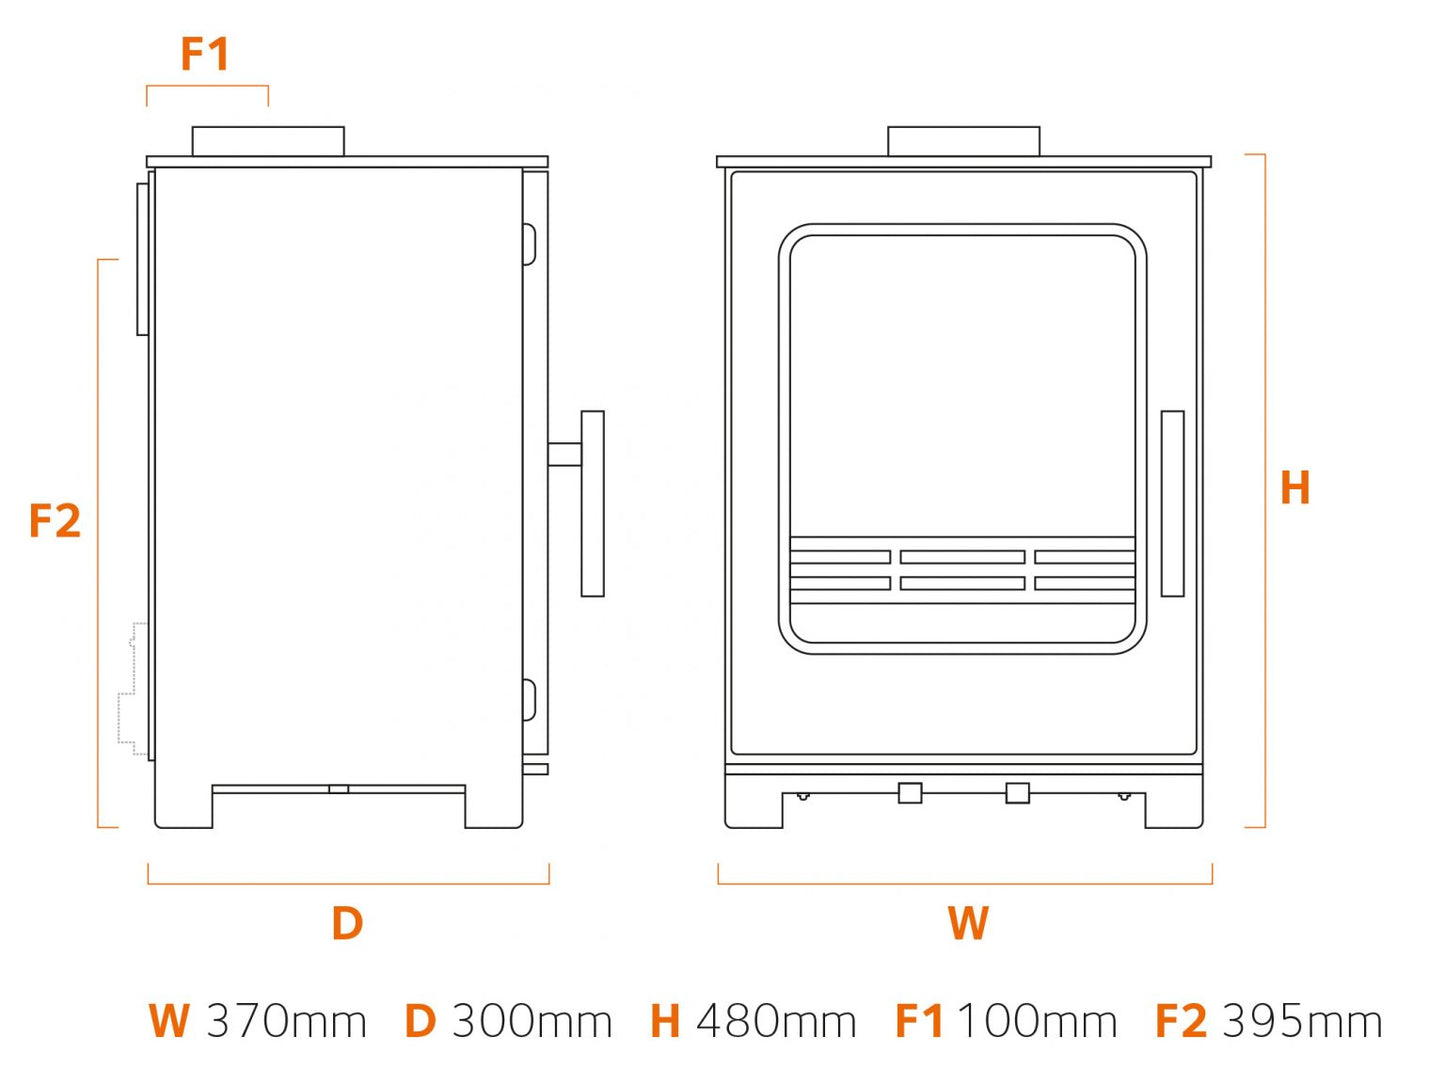 Specifications and dimensions for the Buddy 3 Multifuel stove